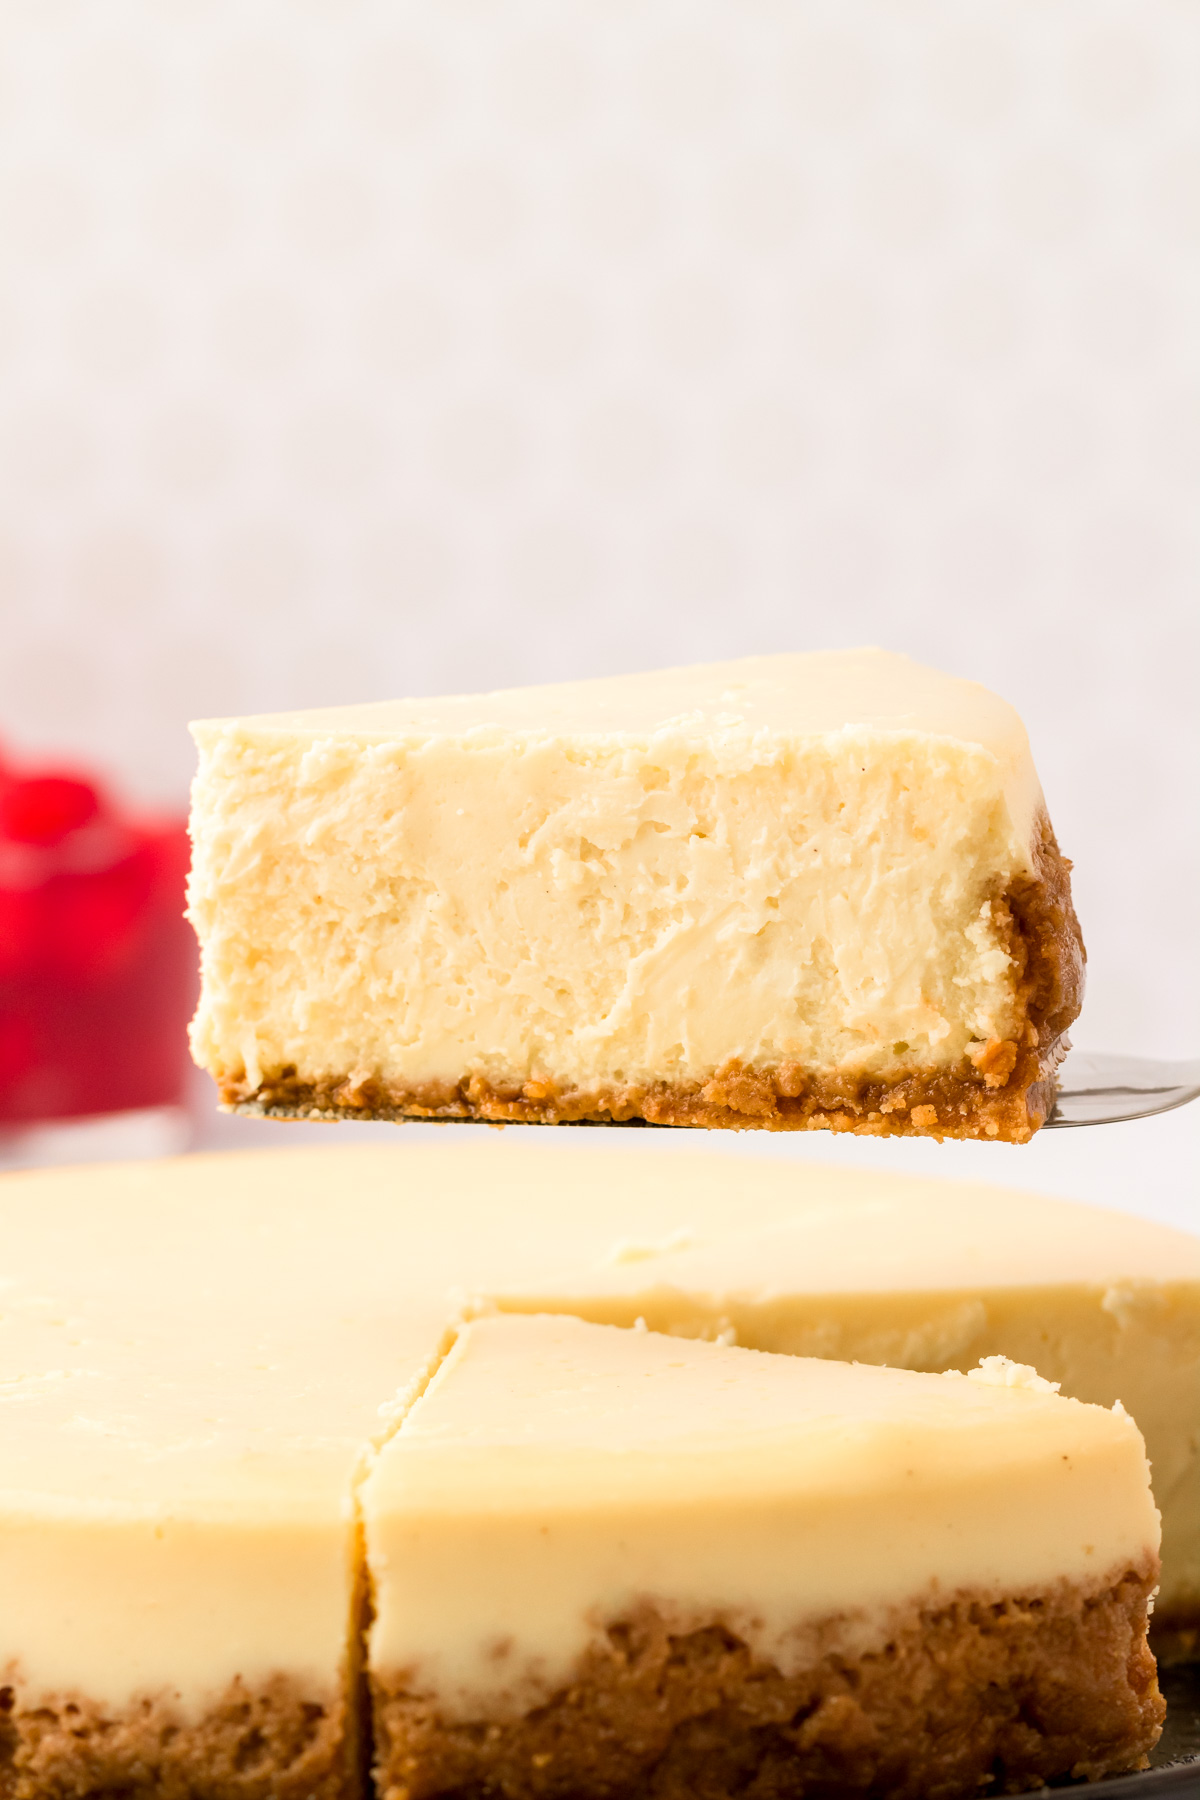 A slice of cheesecake being lifted from the whole.